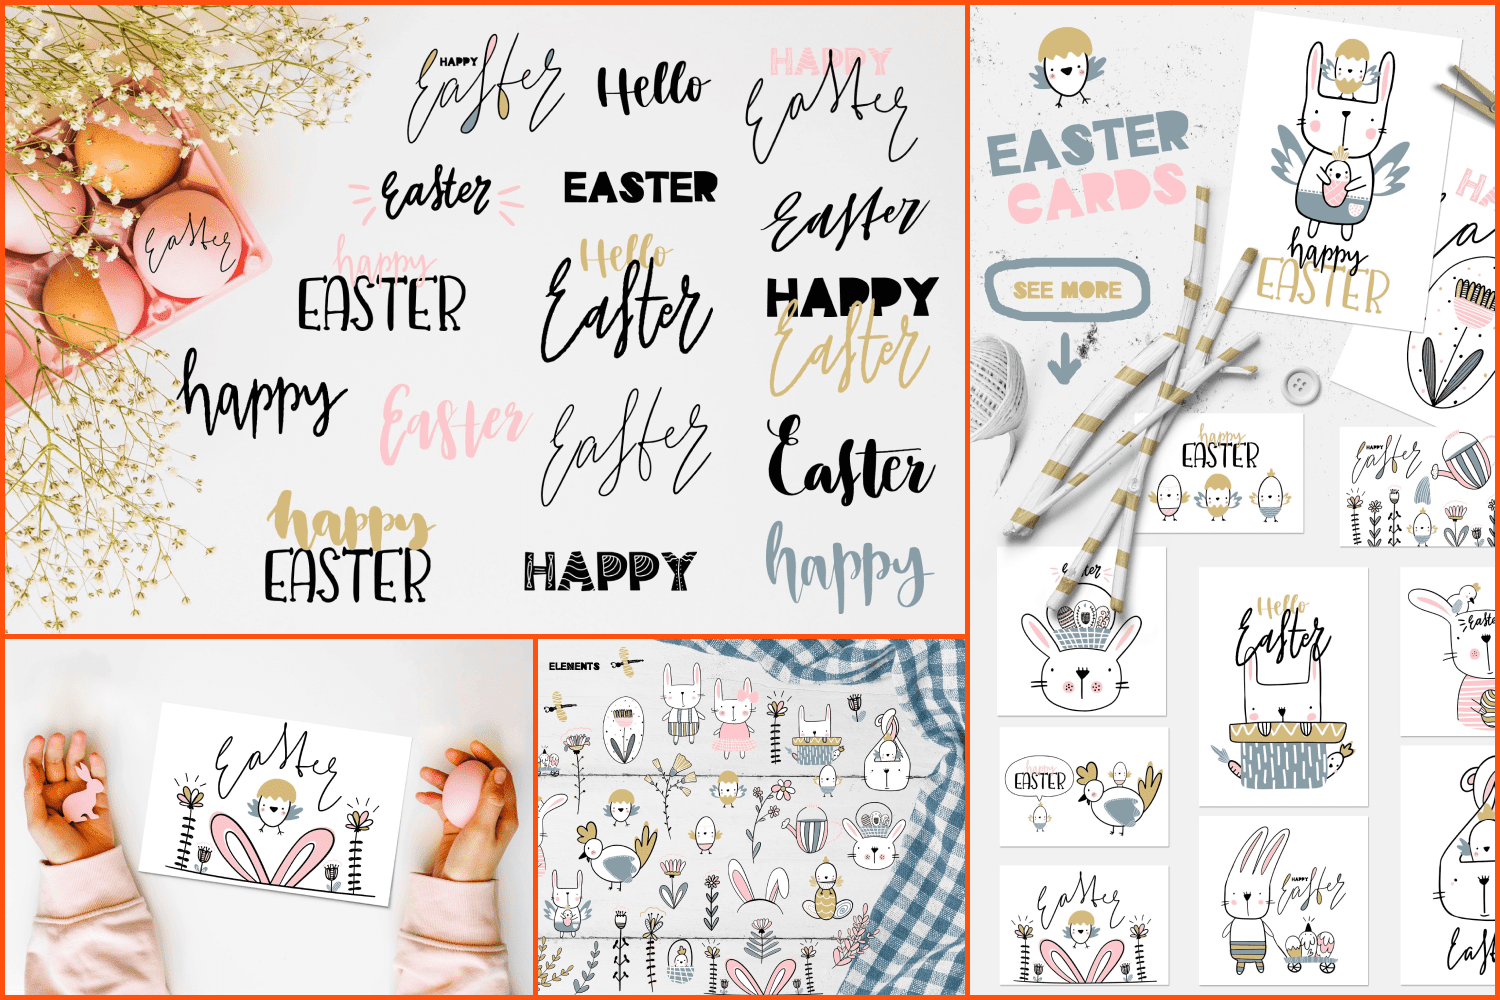 Collage with funny and cute easter images.